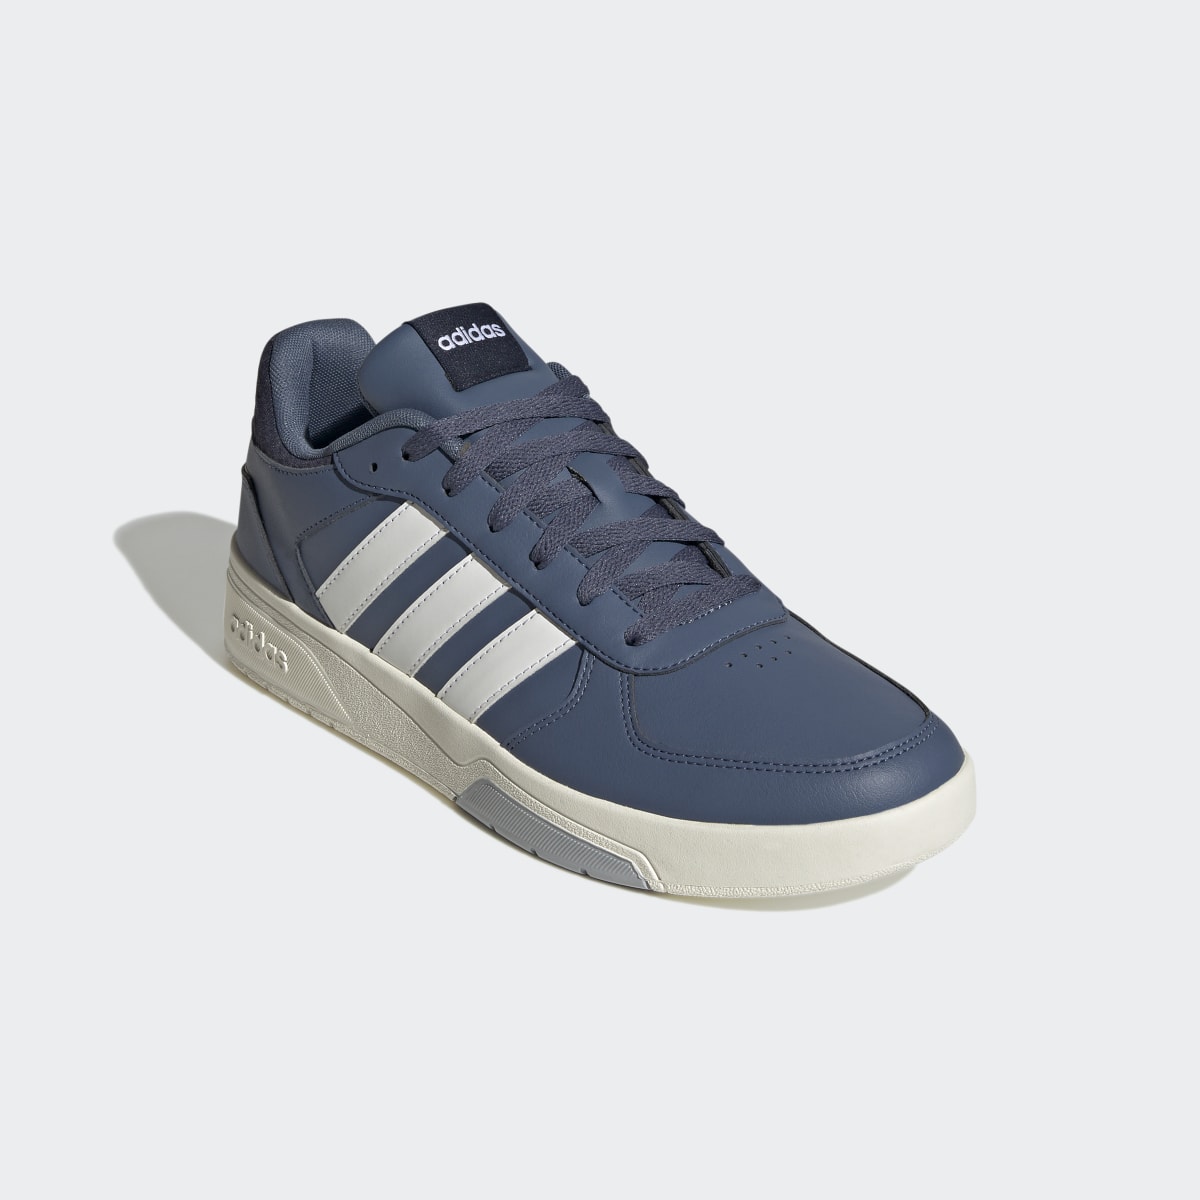 Adidas Chaussure CourtBeat Court Lifestyle. 5